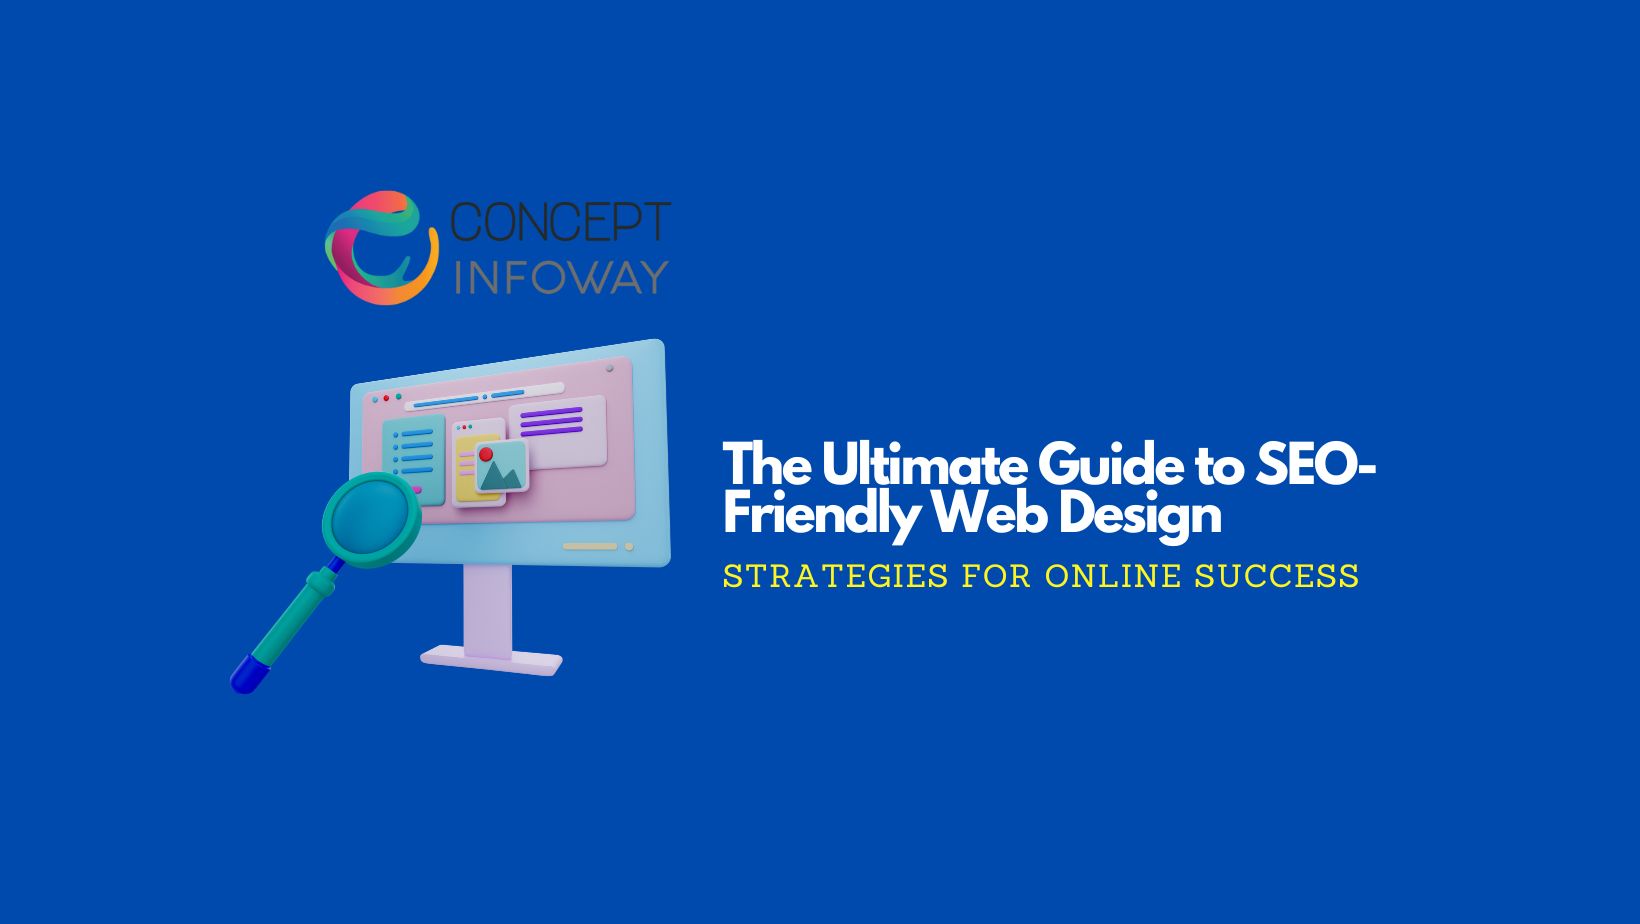 The Ultimate Guide to SEO-Friendly Web Design: Strategies for Online Success